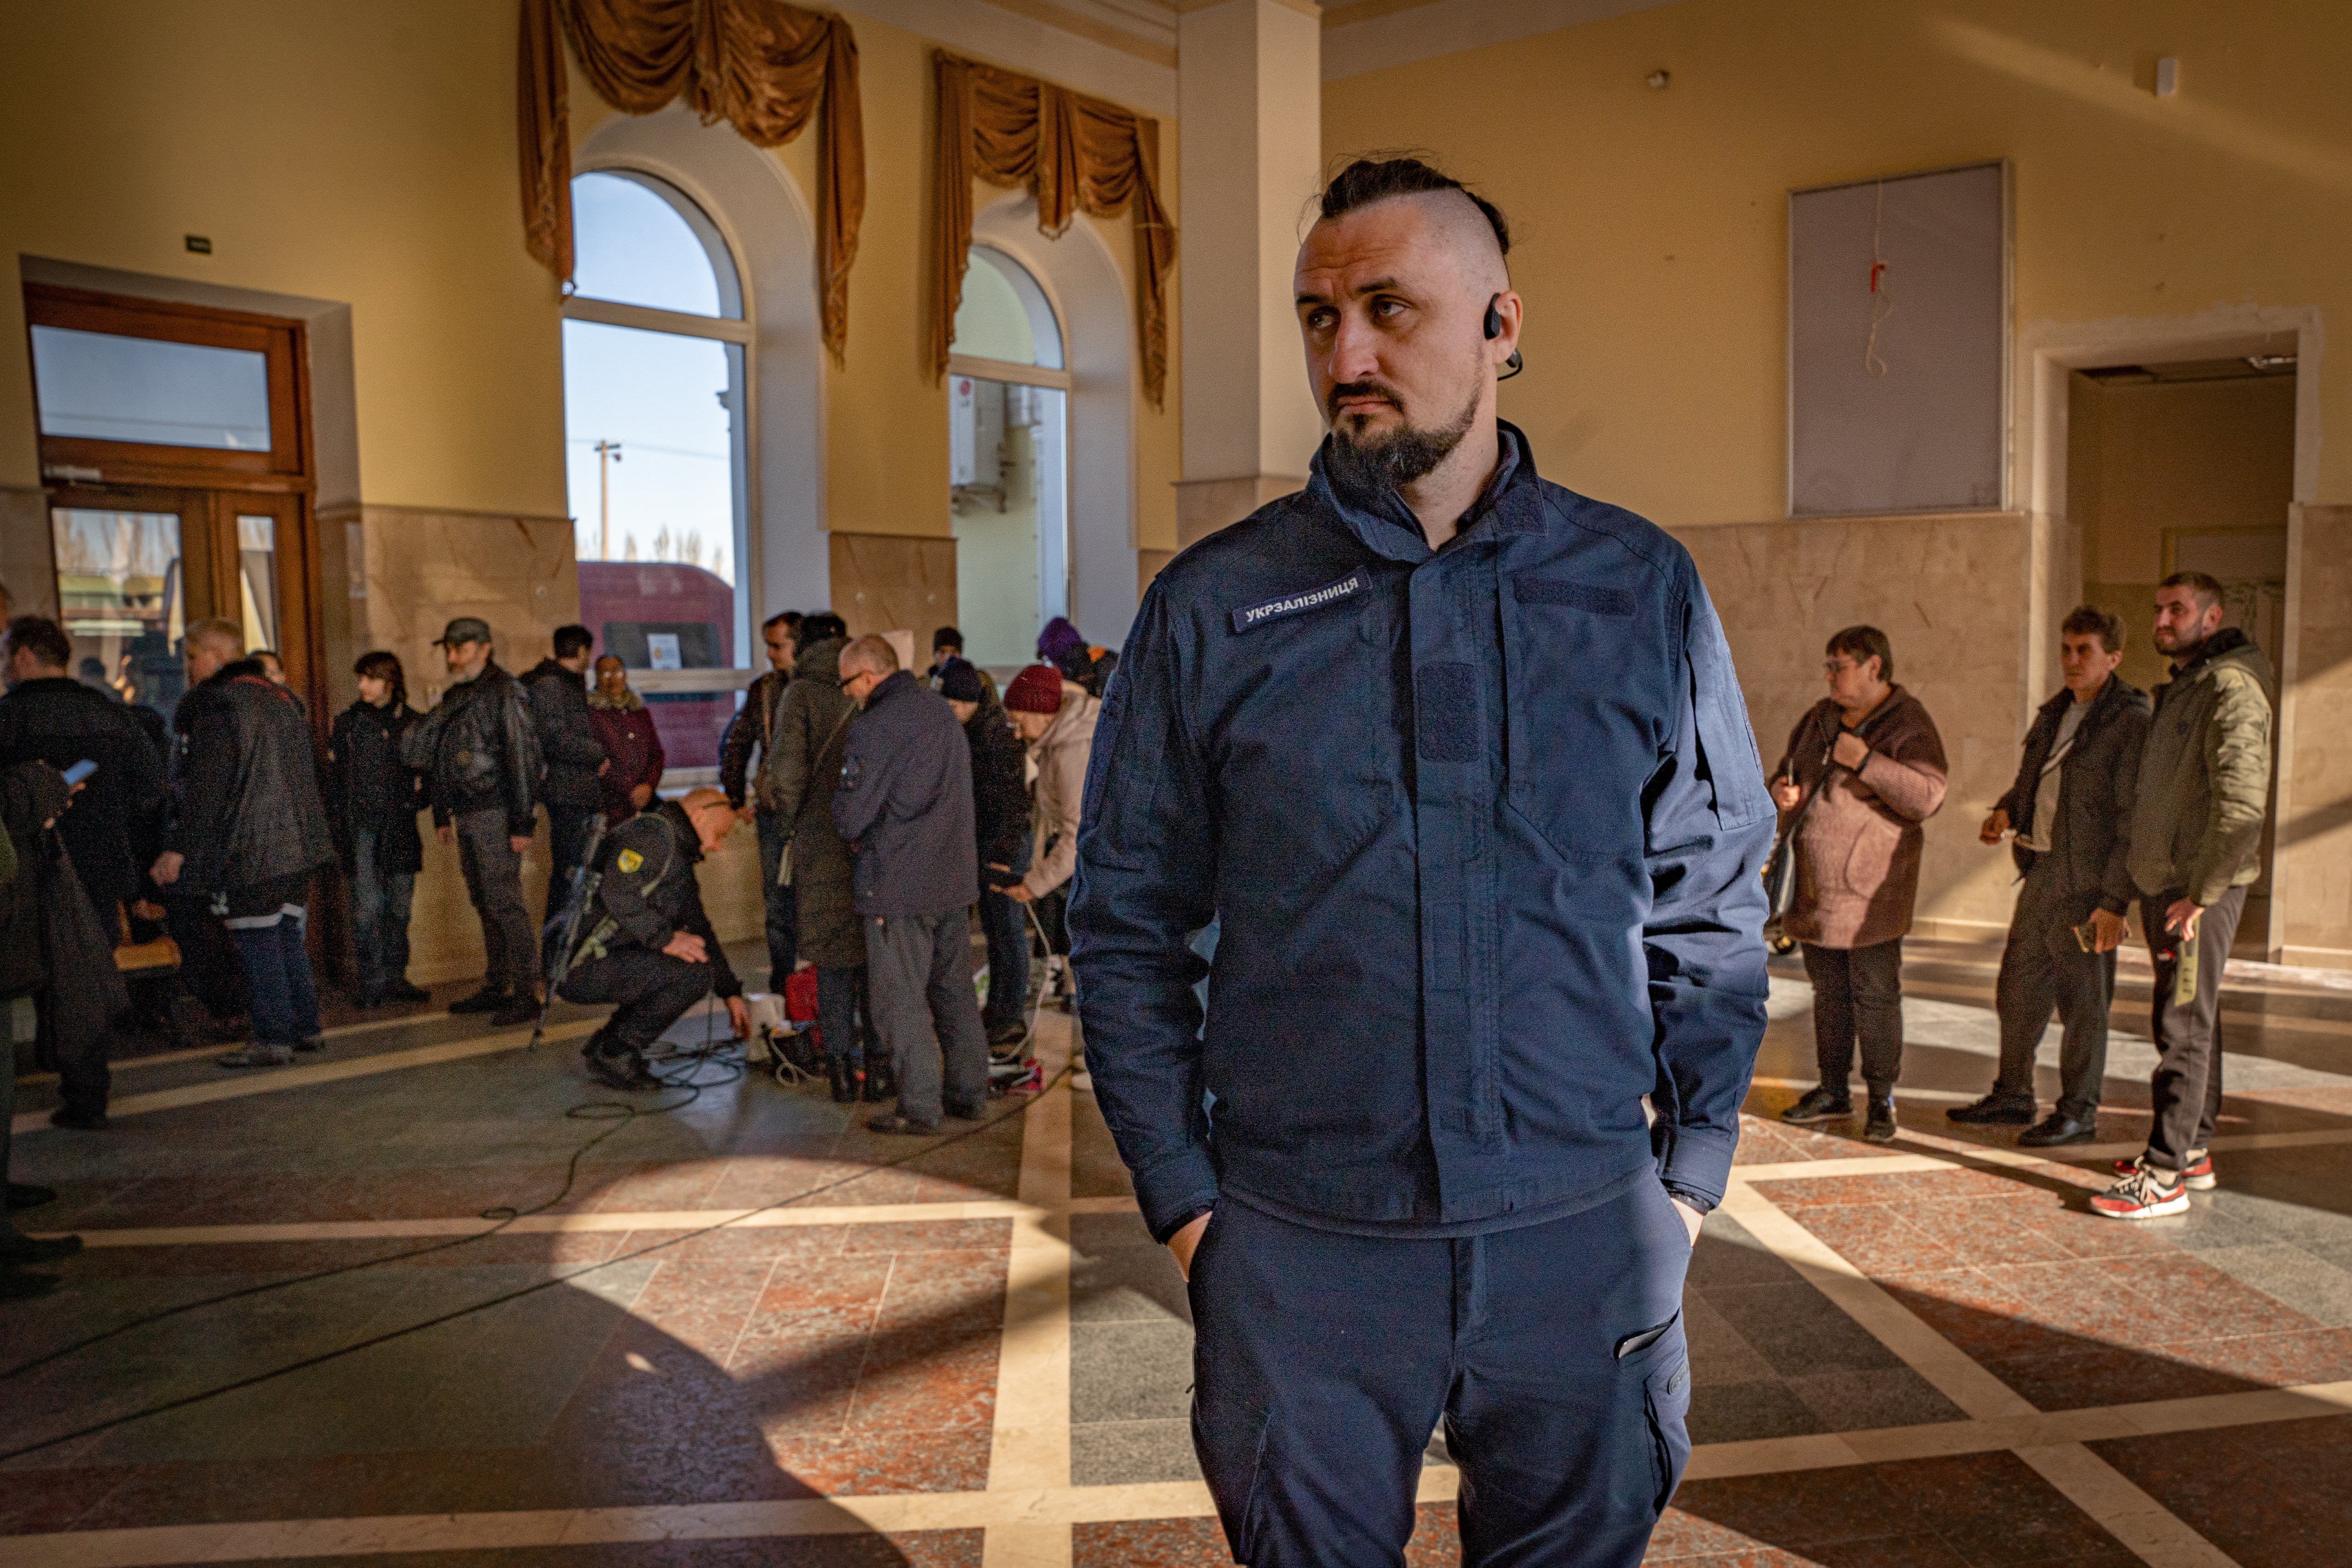 Oleksandr Kamyshin, Ukraine’s railway chief, inside the train station at Kherson, which was liberated only last week but will see the first trains arrive soon